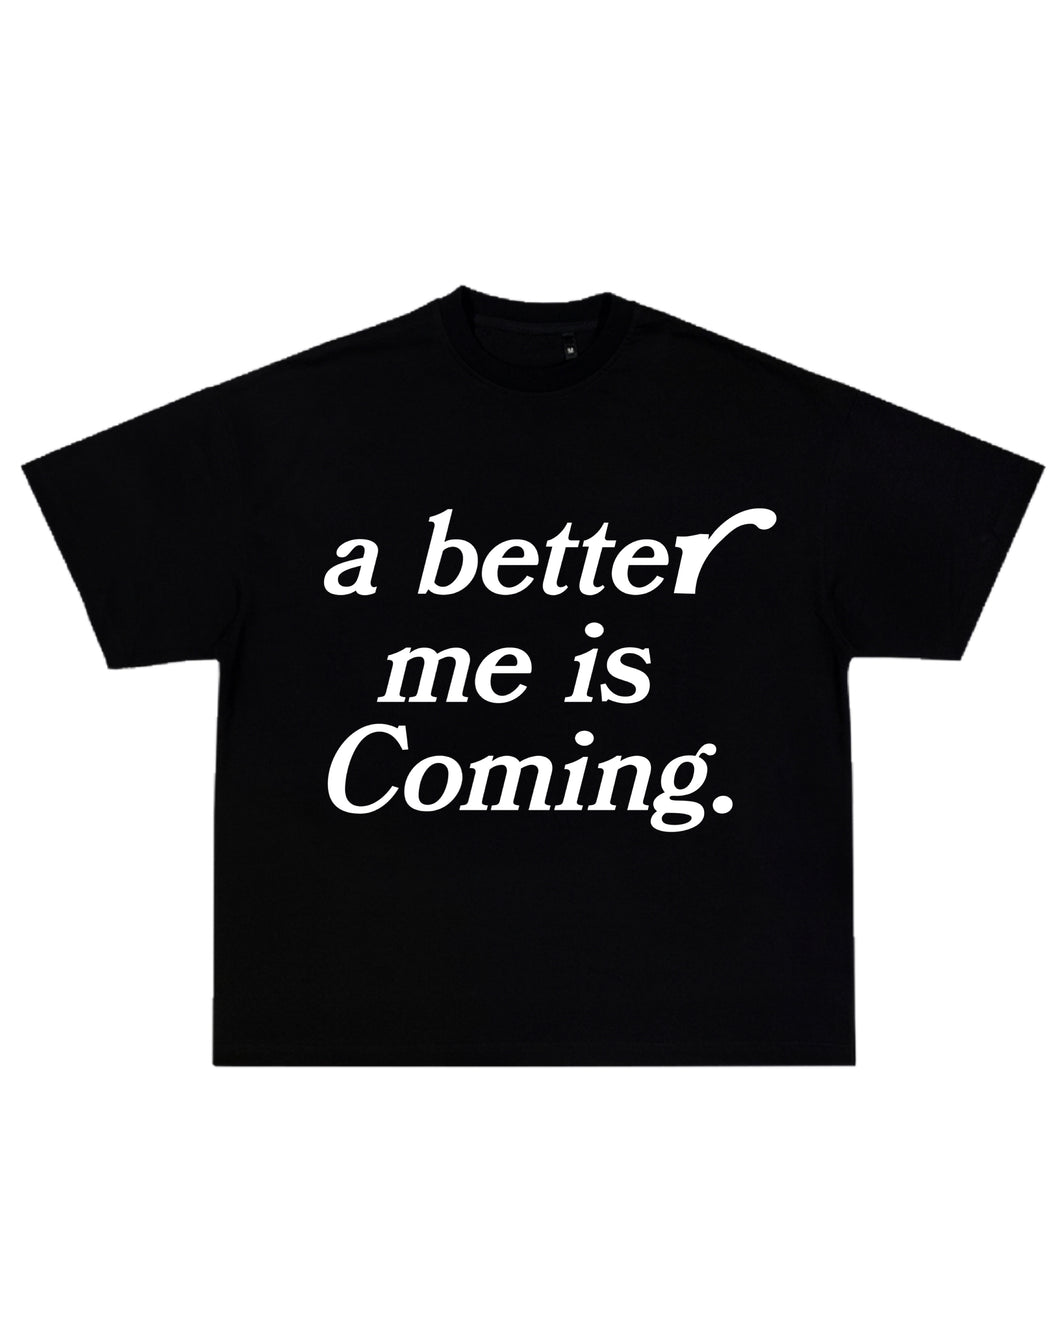 A better me is Coming -  Blvck